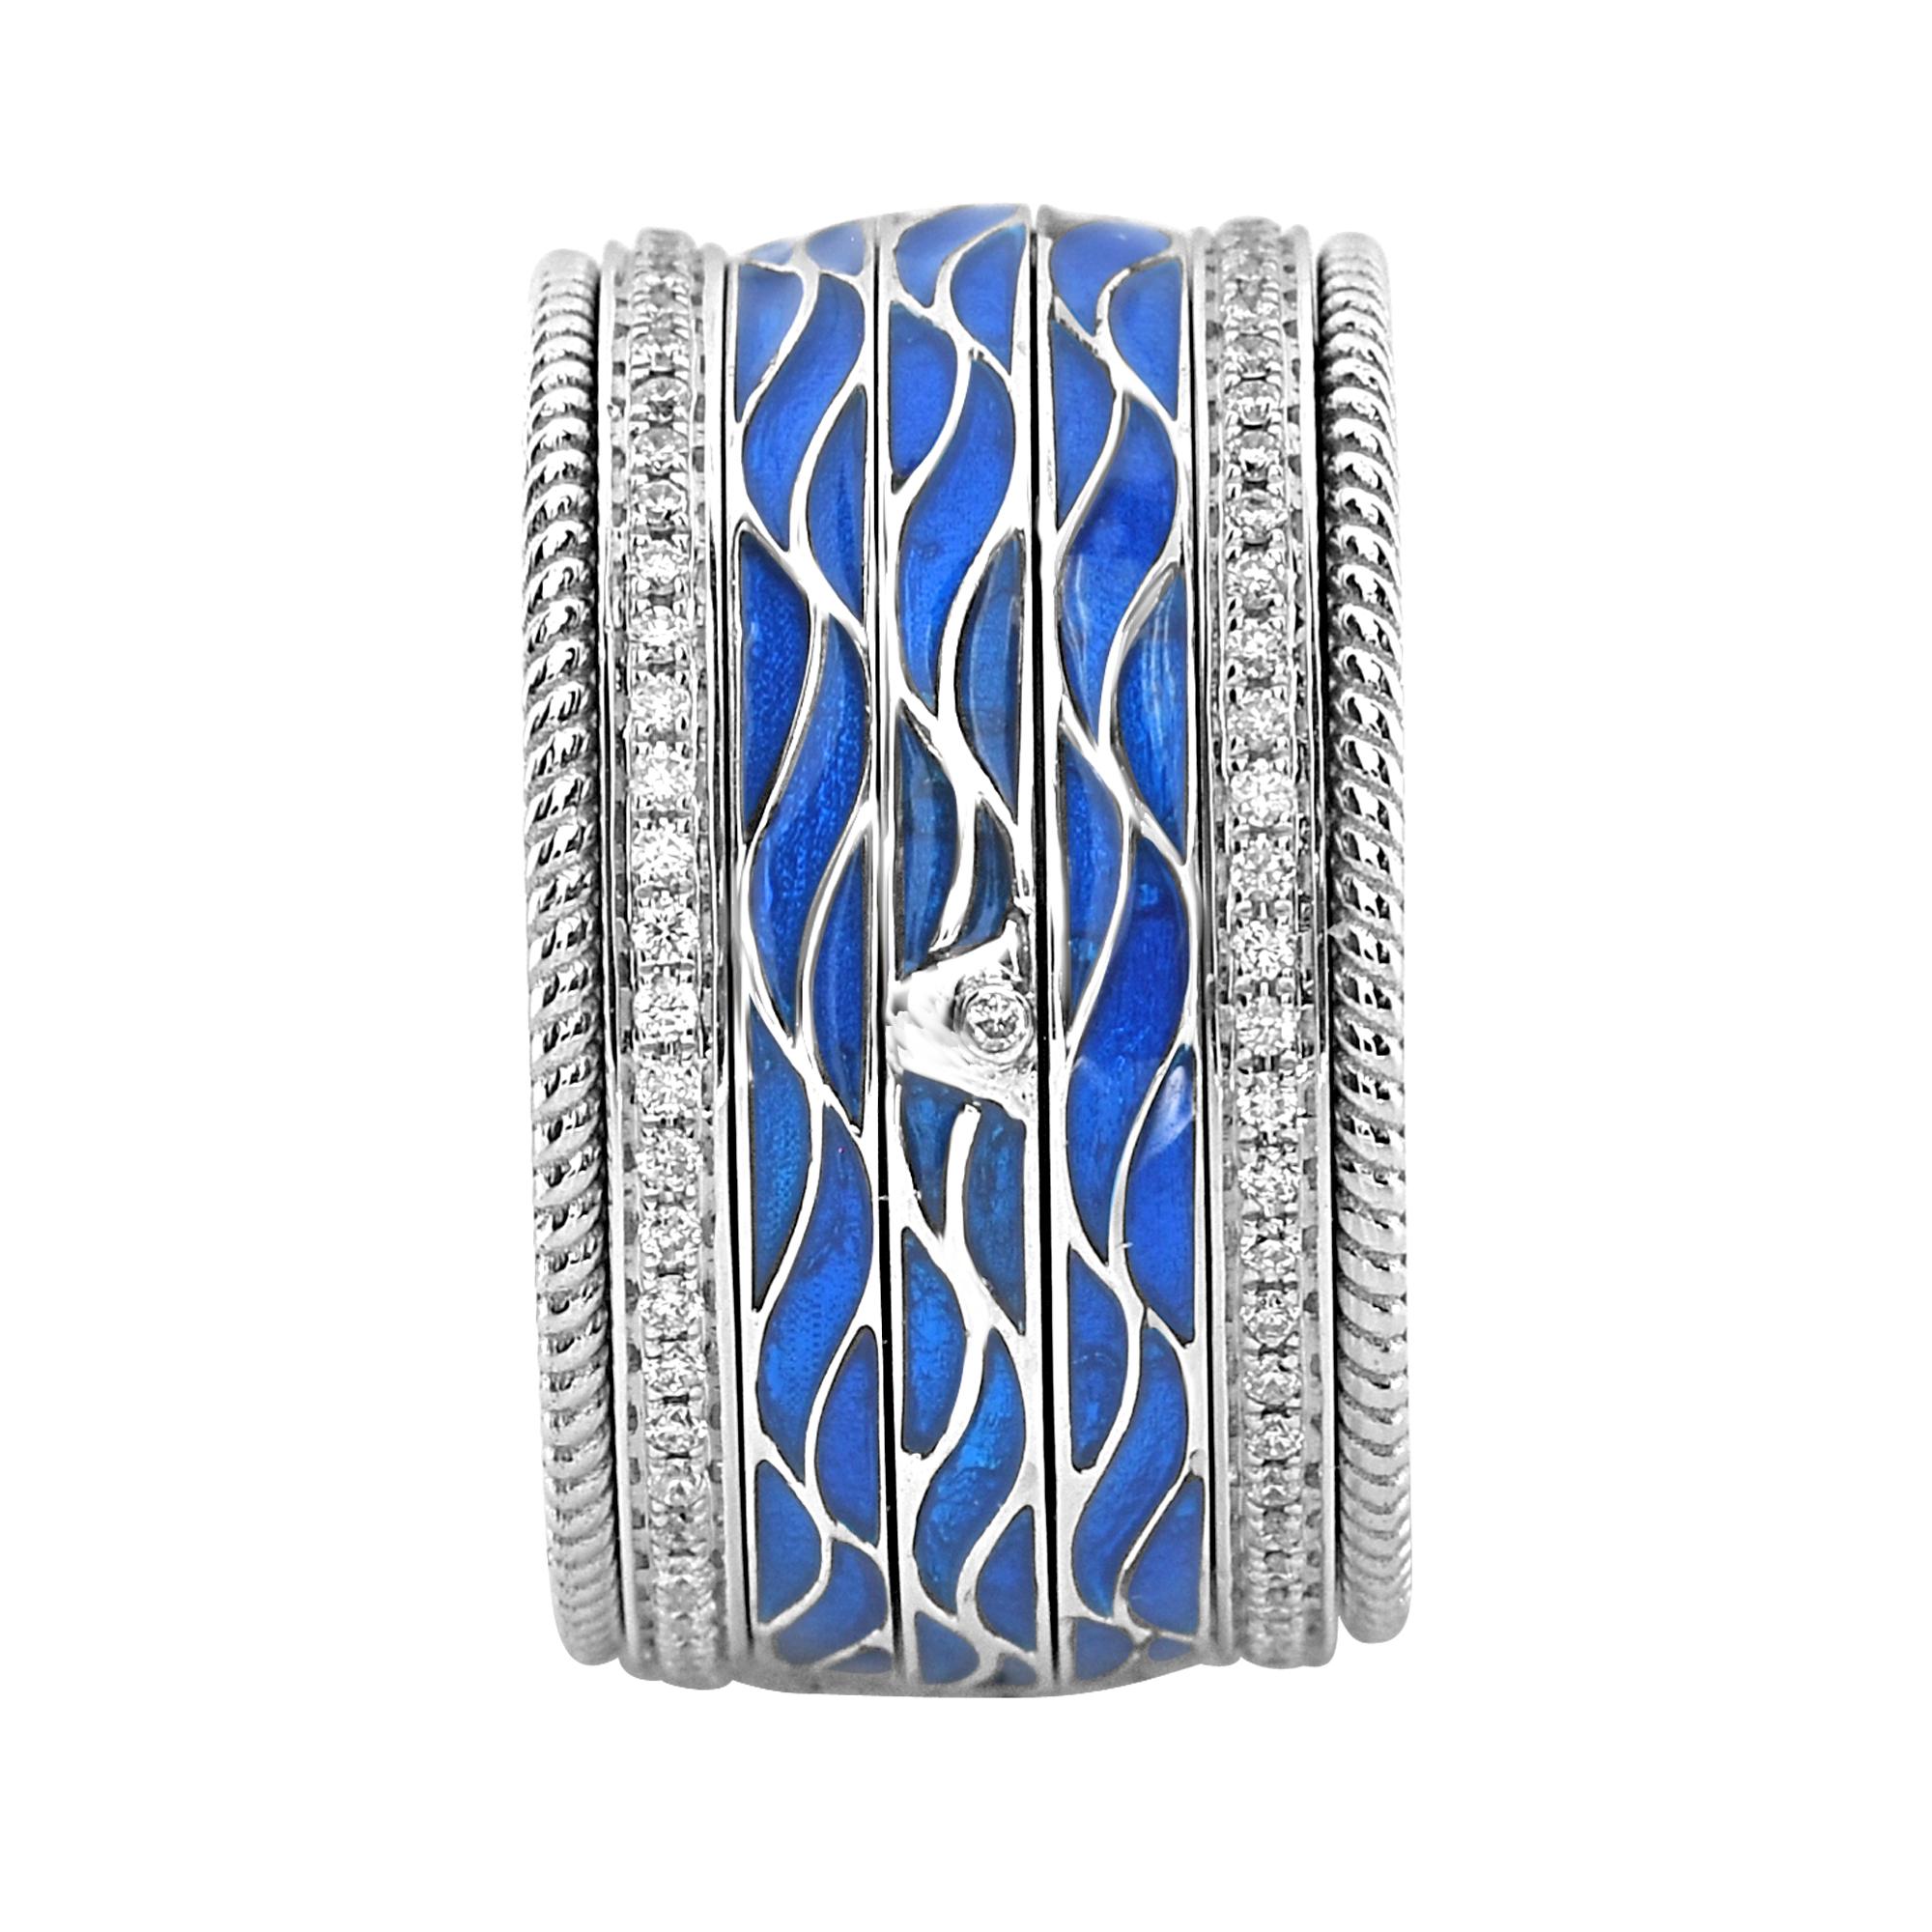 Very Stylish 18k White Gold Band with Blue Wave Pattern Enamel and Two Row Diamond
Total Carat Weight: 0.45 Carats 
White Diamonds; 0.45 Carats (total 121 stones)
Setiting: 19.48 grams, 18k White Gold